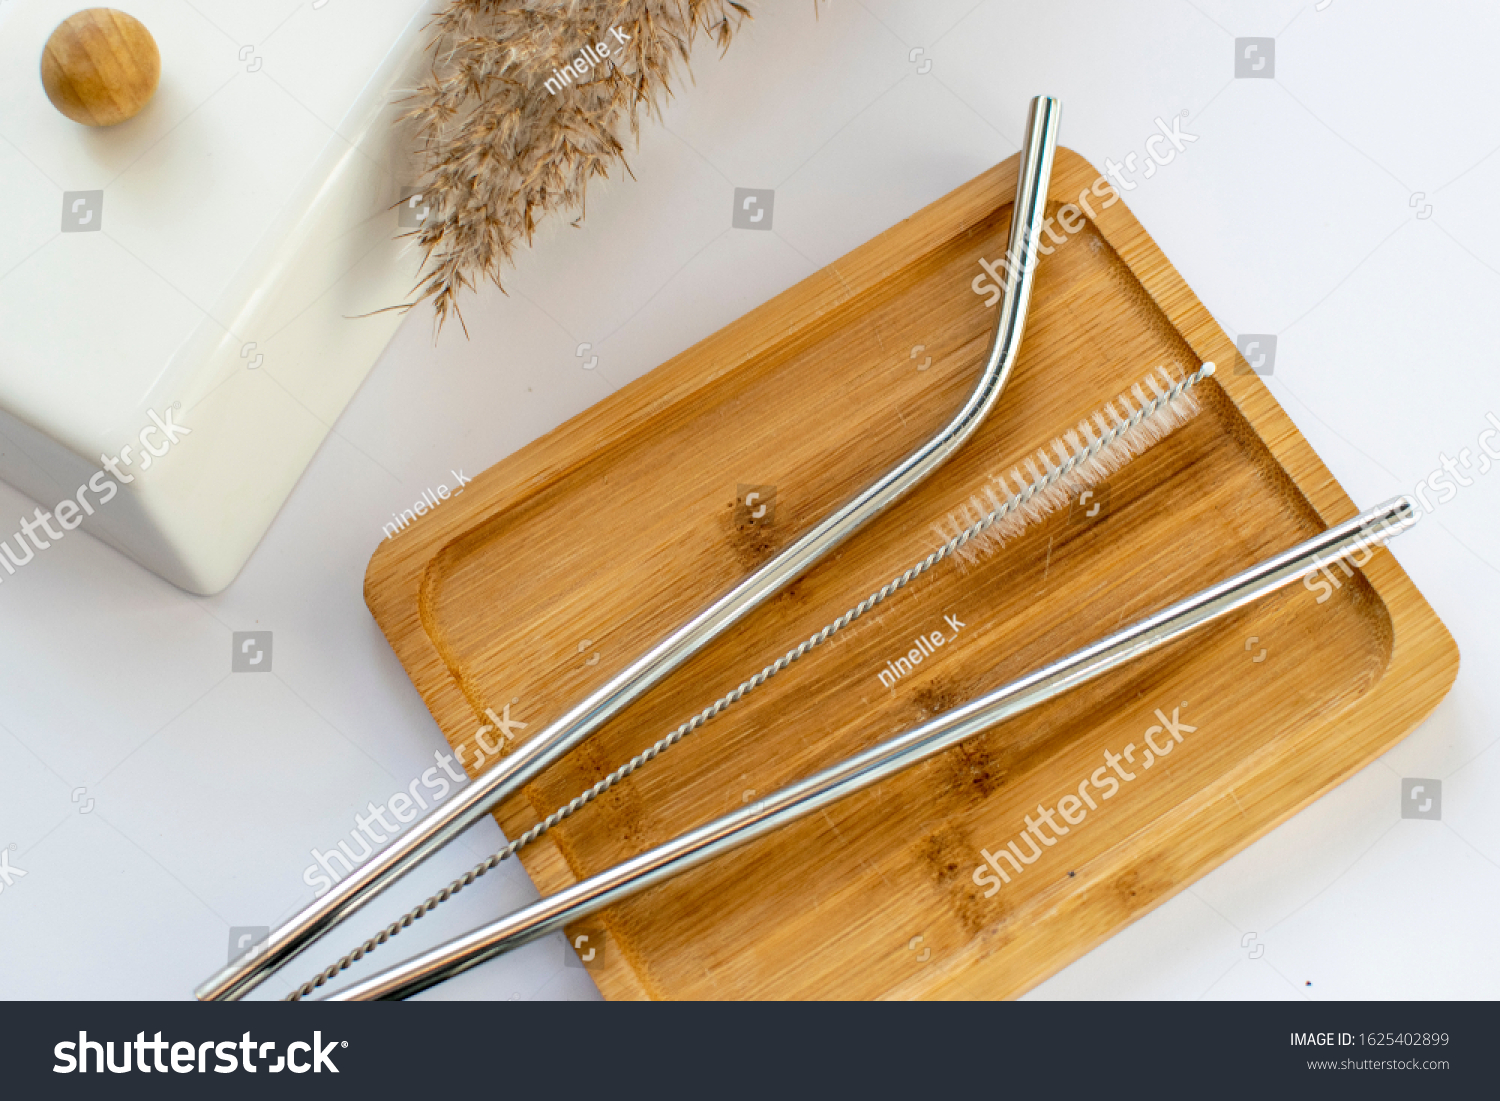 Reusable Metal Straws with Portable Case - Stainless Steel, Eco-Friendly Drinking Straw Set with  Cleaning Brushes. Stainless Steel Metal Straws, Reusable Comfortable Rounded tip Drinking Straws #1625402899